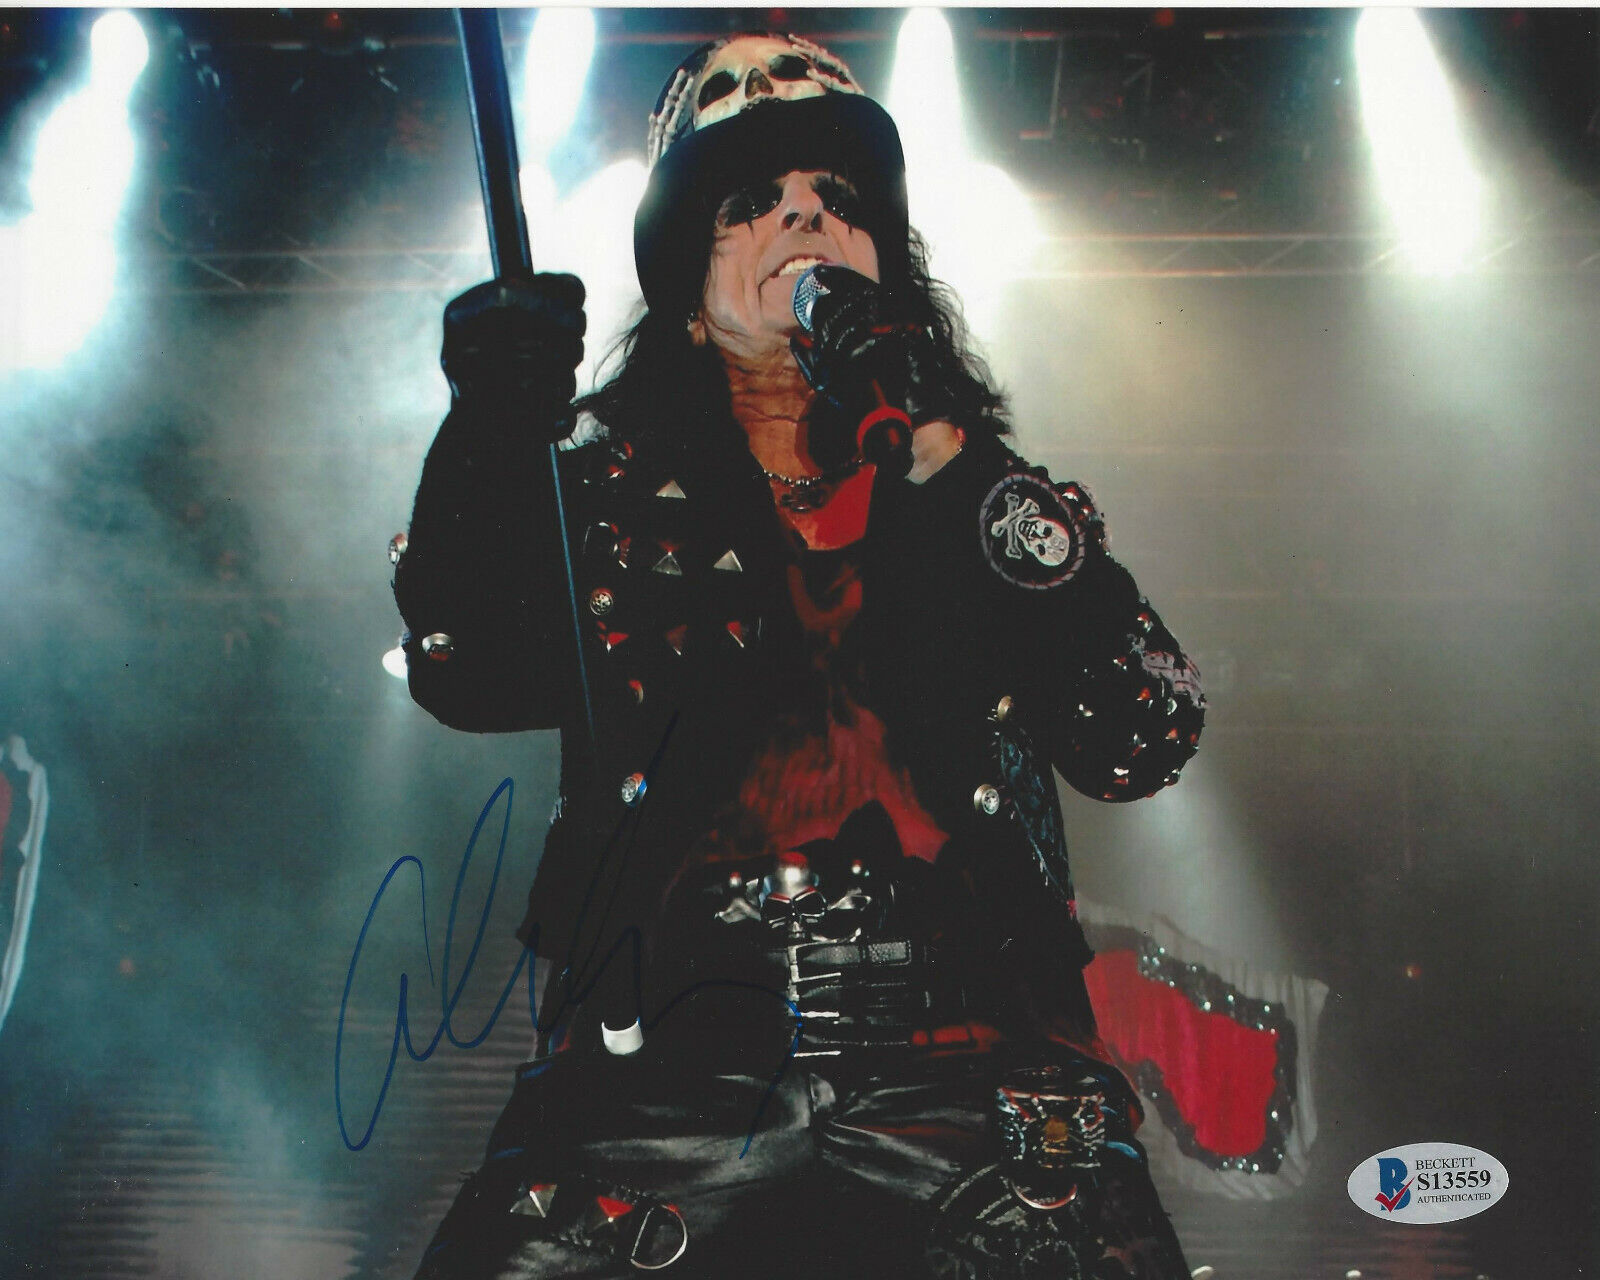 SINGER ALICE COOPER SIGNED 8X10 Photo Poster painting SHOCK ROCK ICON 7 PROOF BECKETT COA BAS